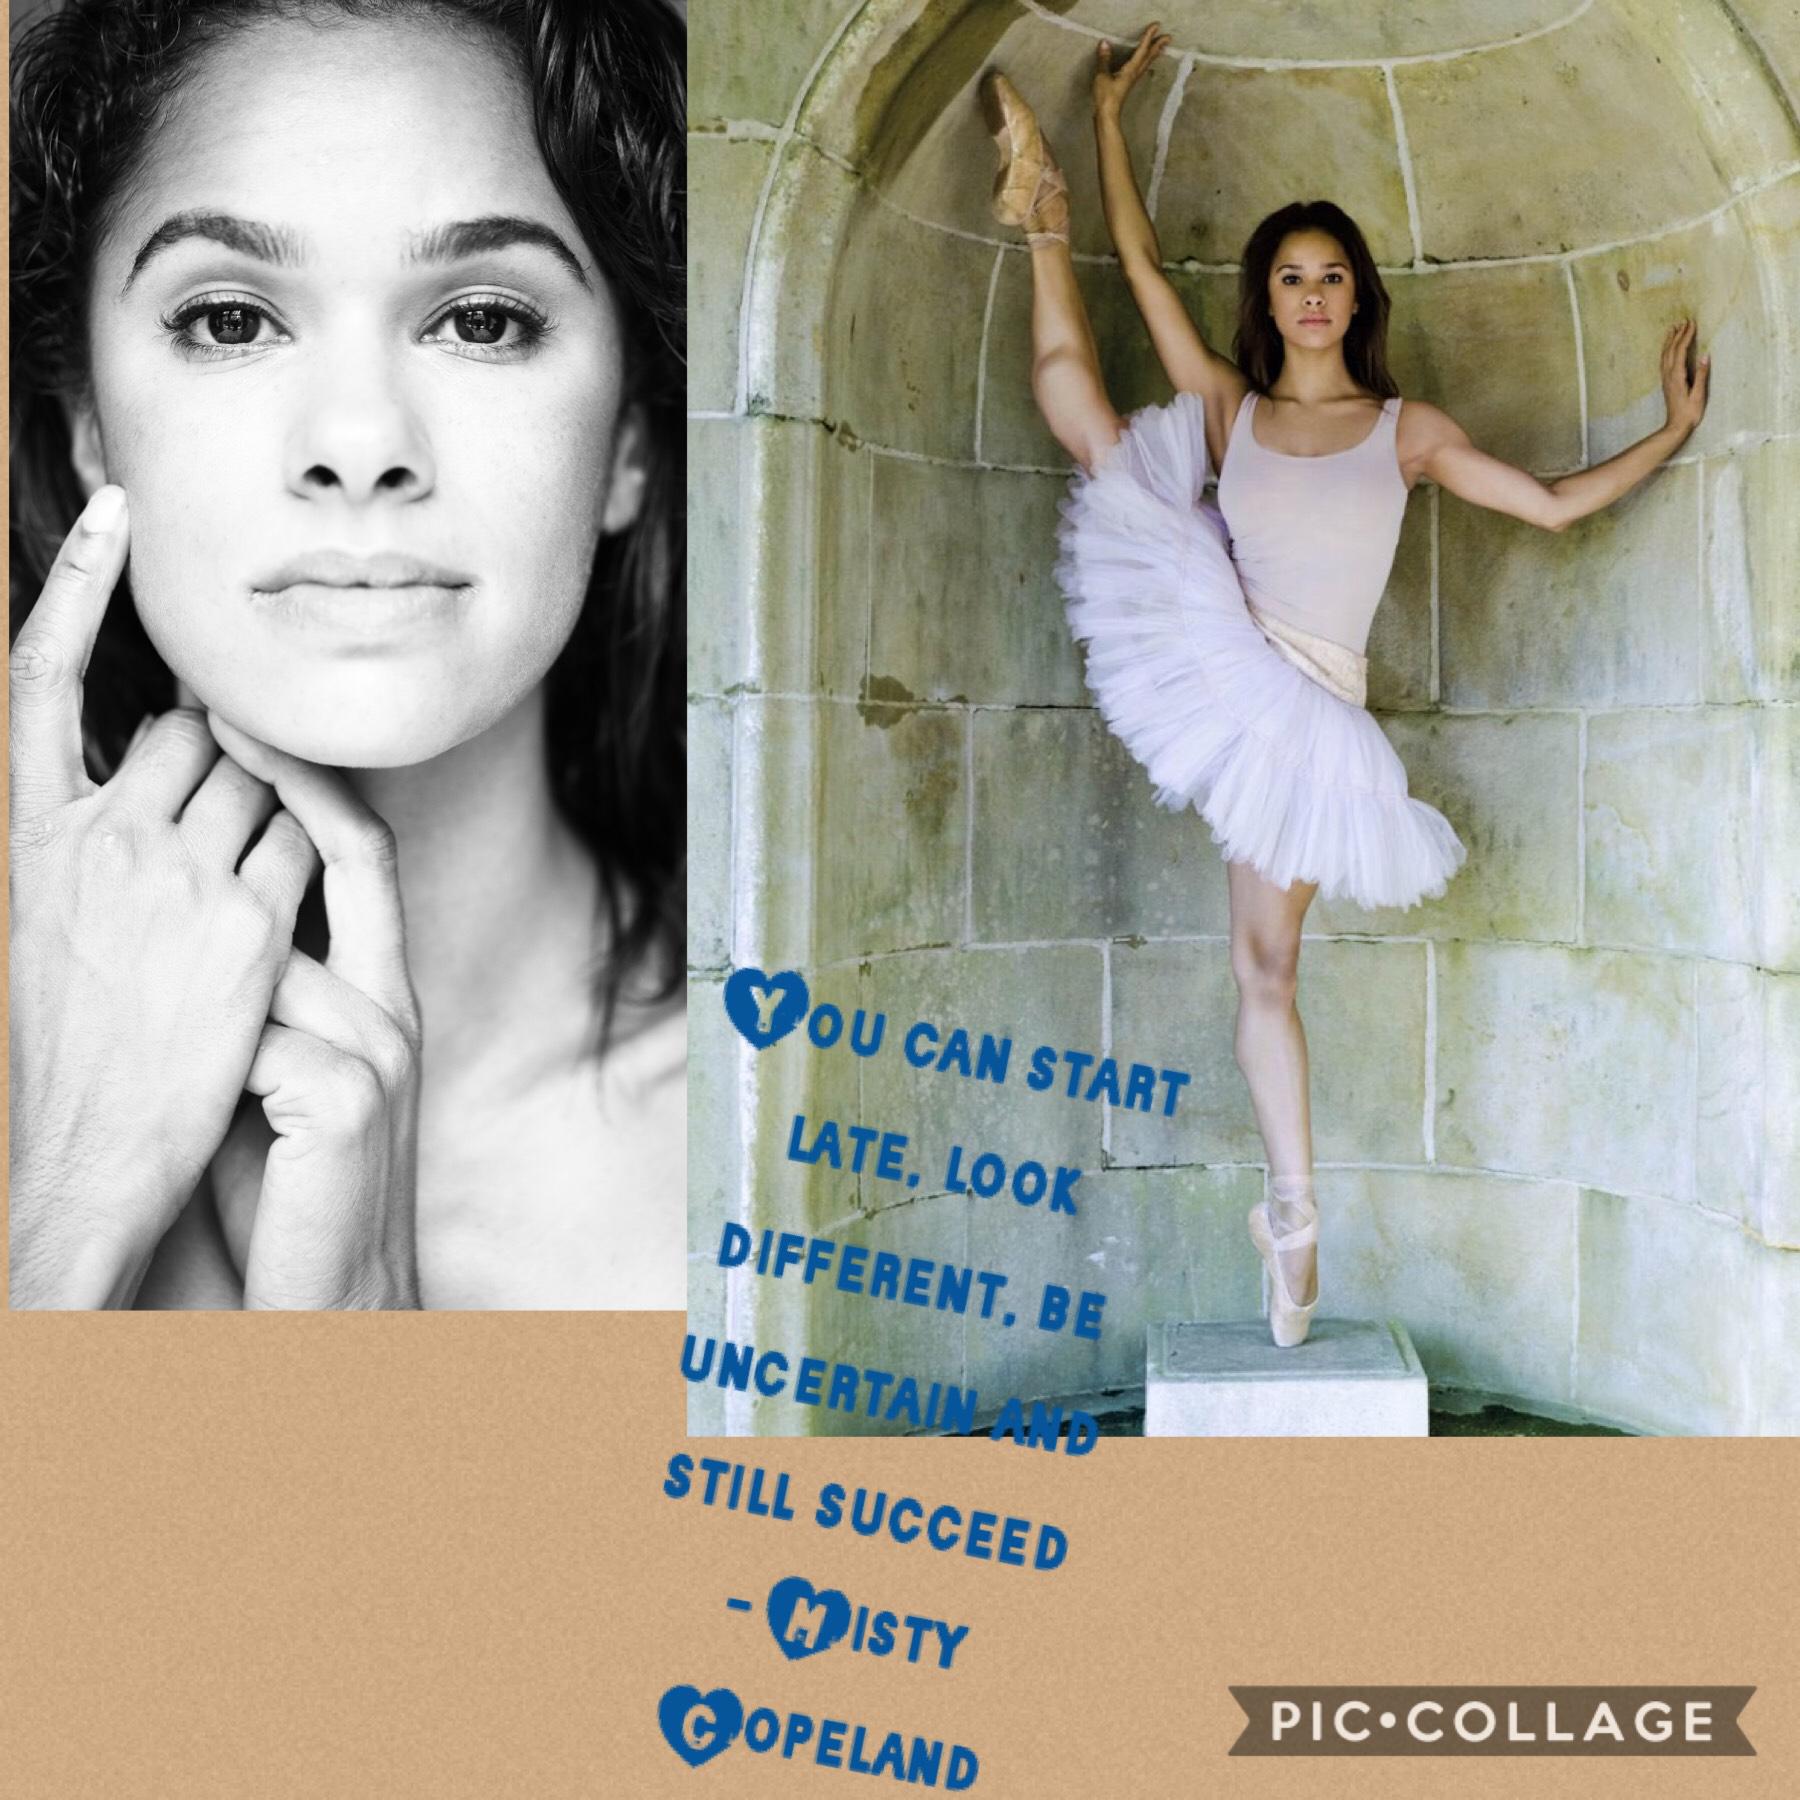 Misty Copeland is my role model and the person that I look up to and she inspires me like no one else.